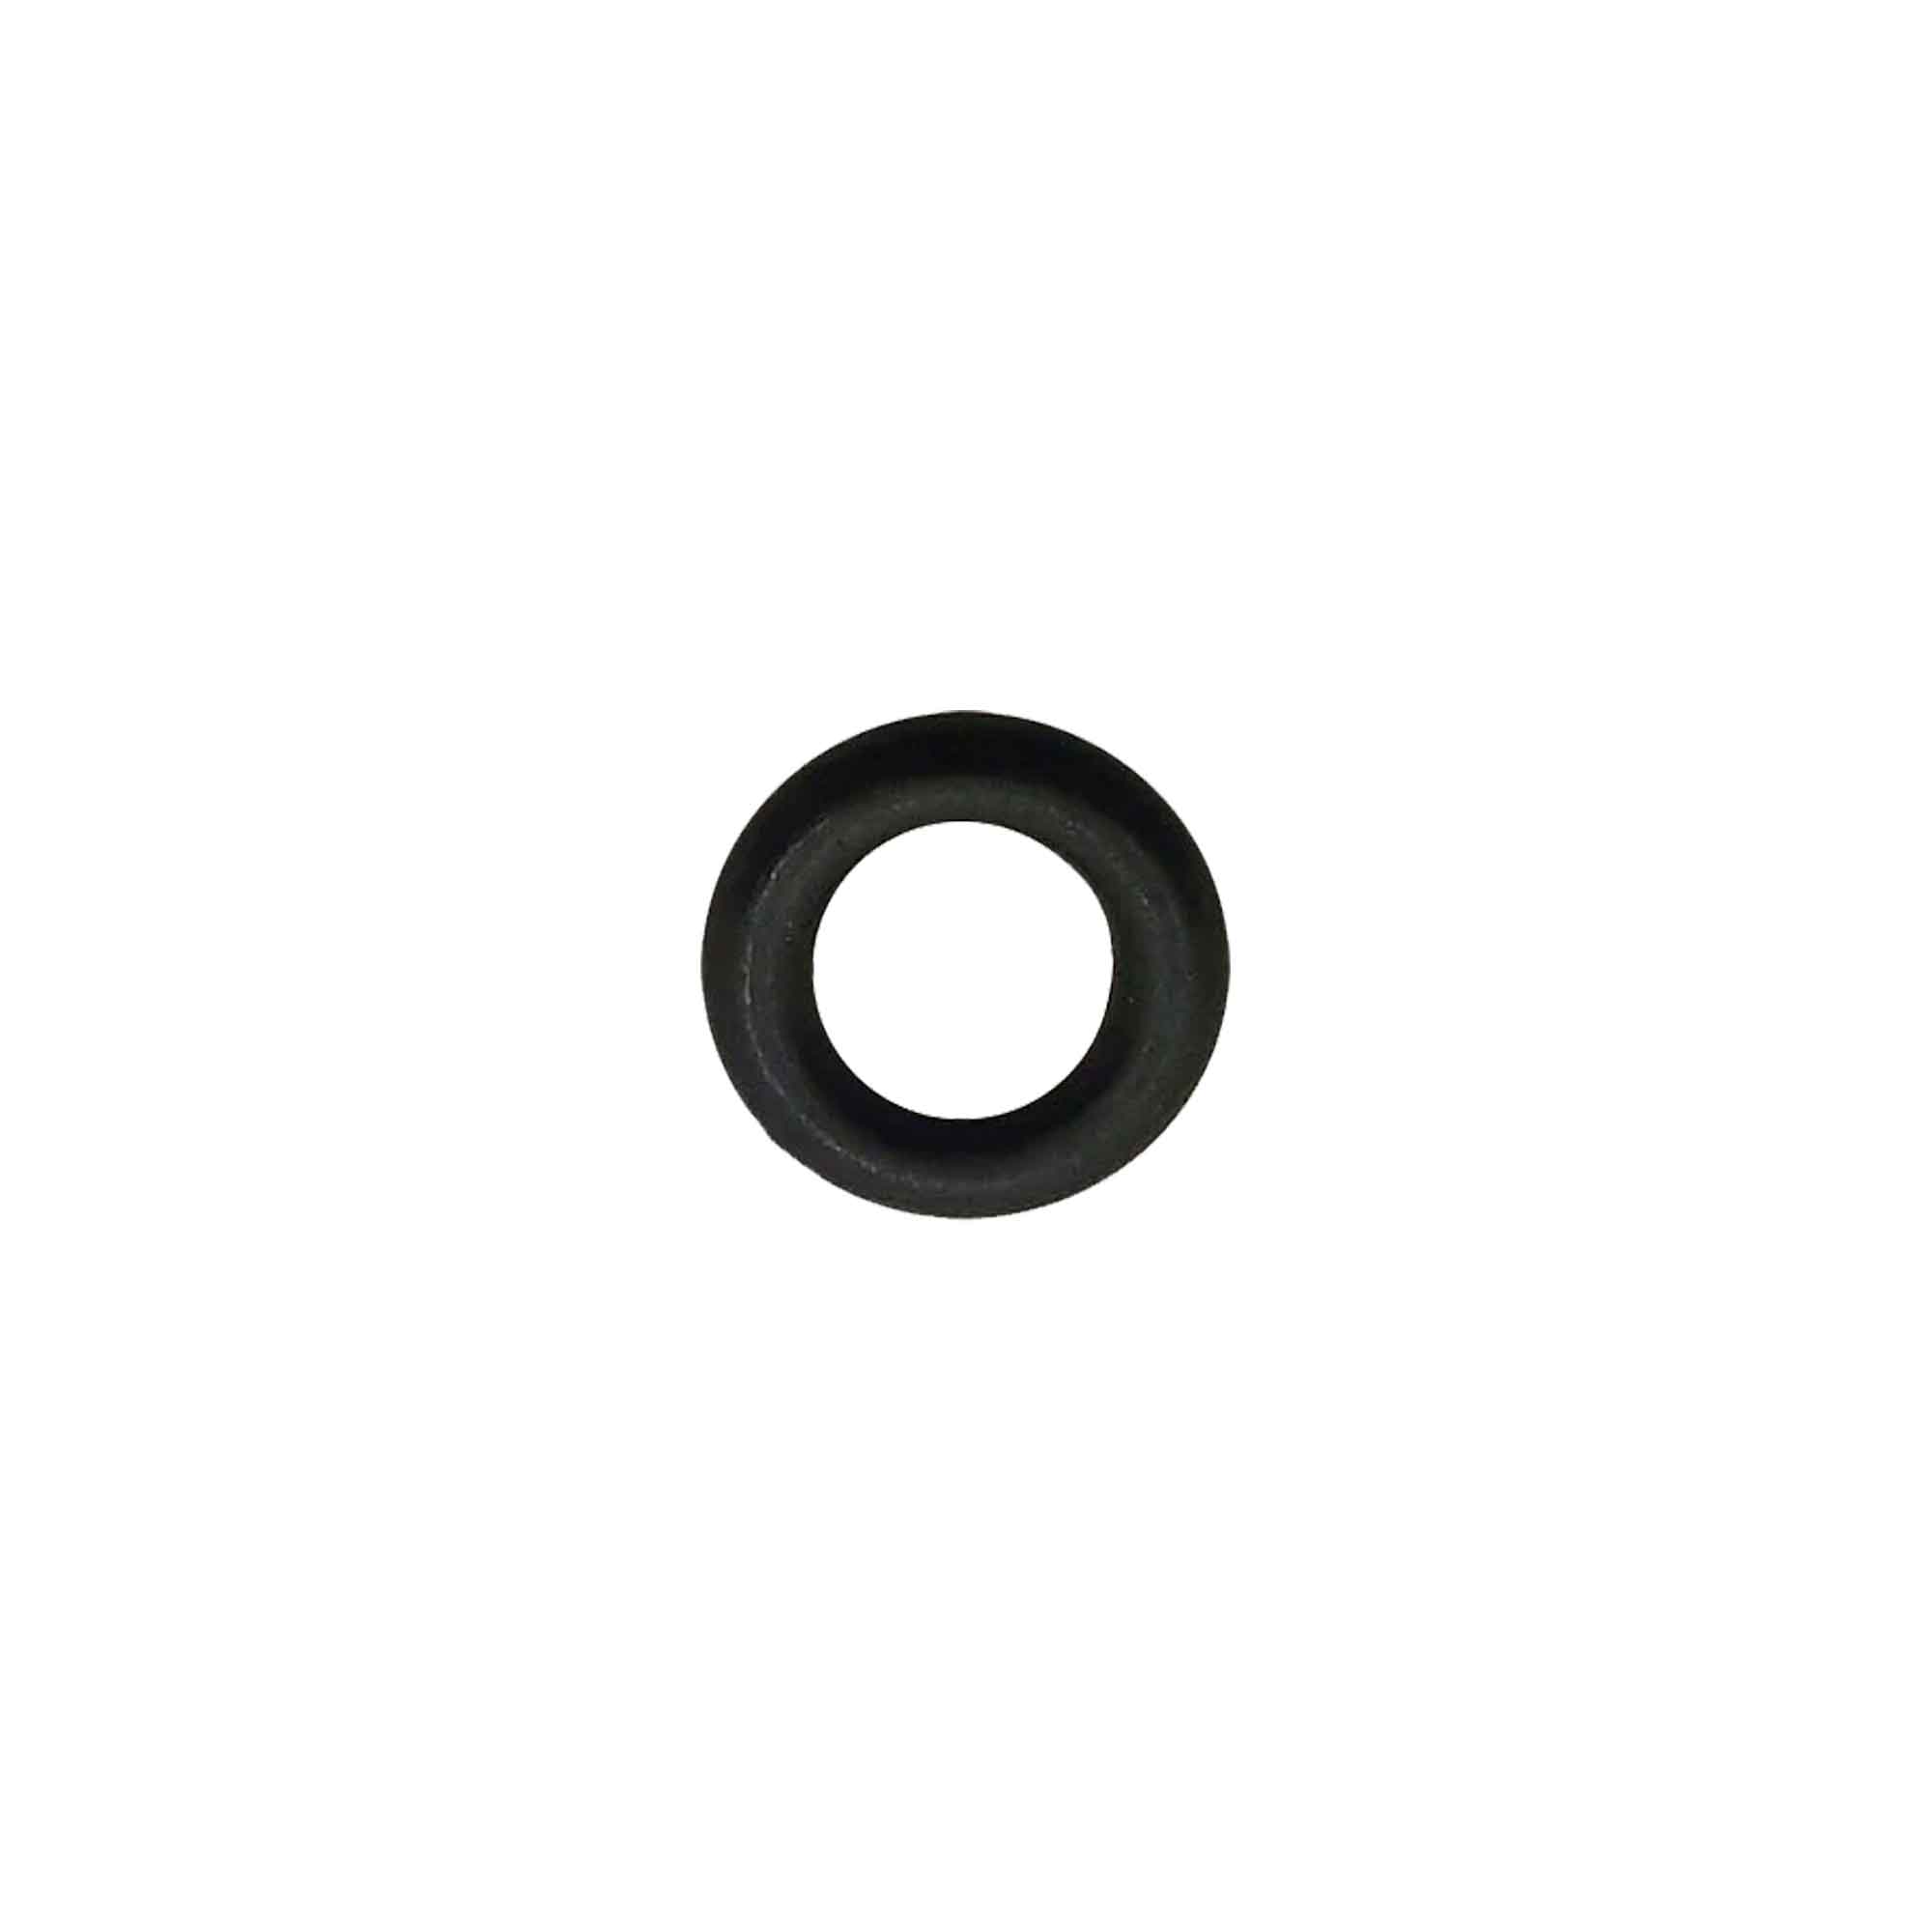 257425 - O-Ring, Pack of 6 - PURspray